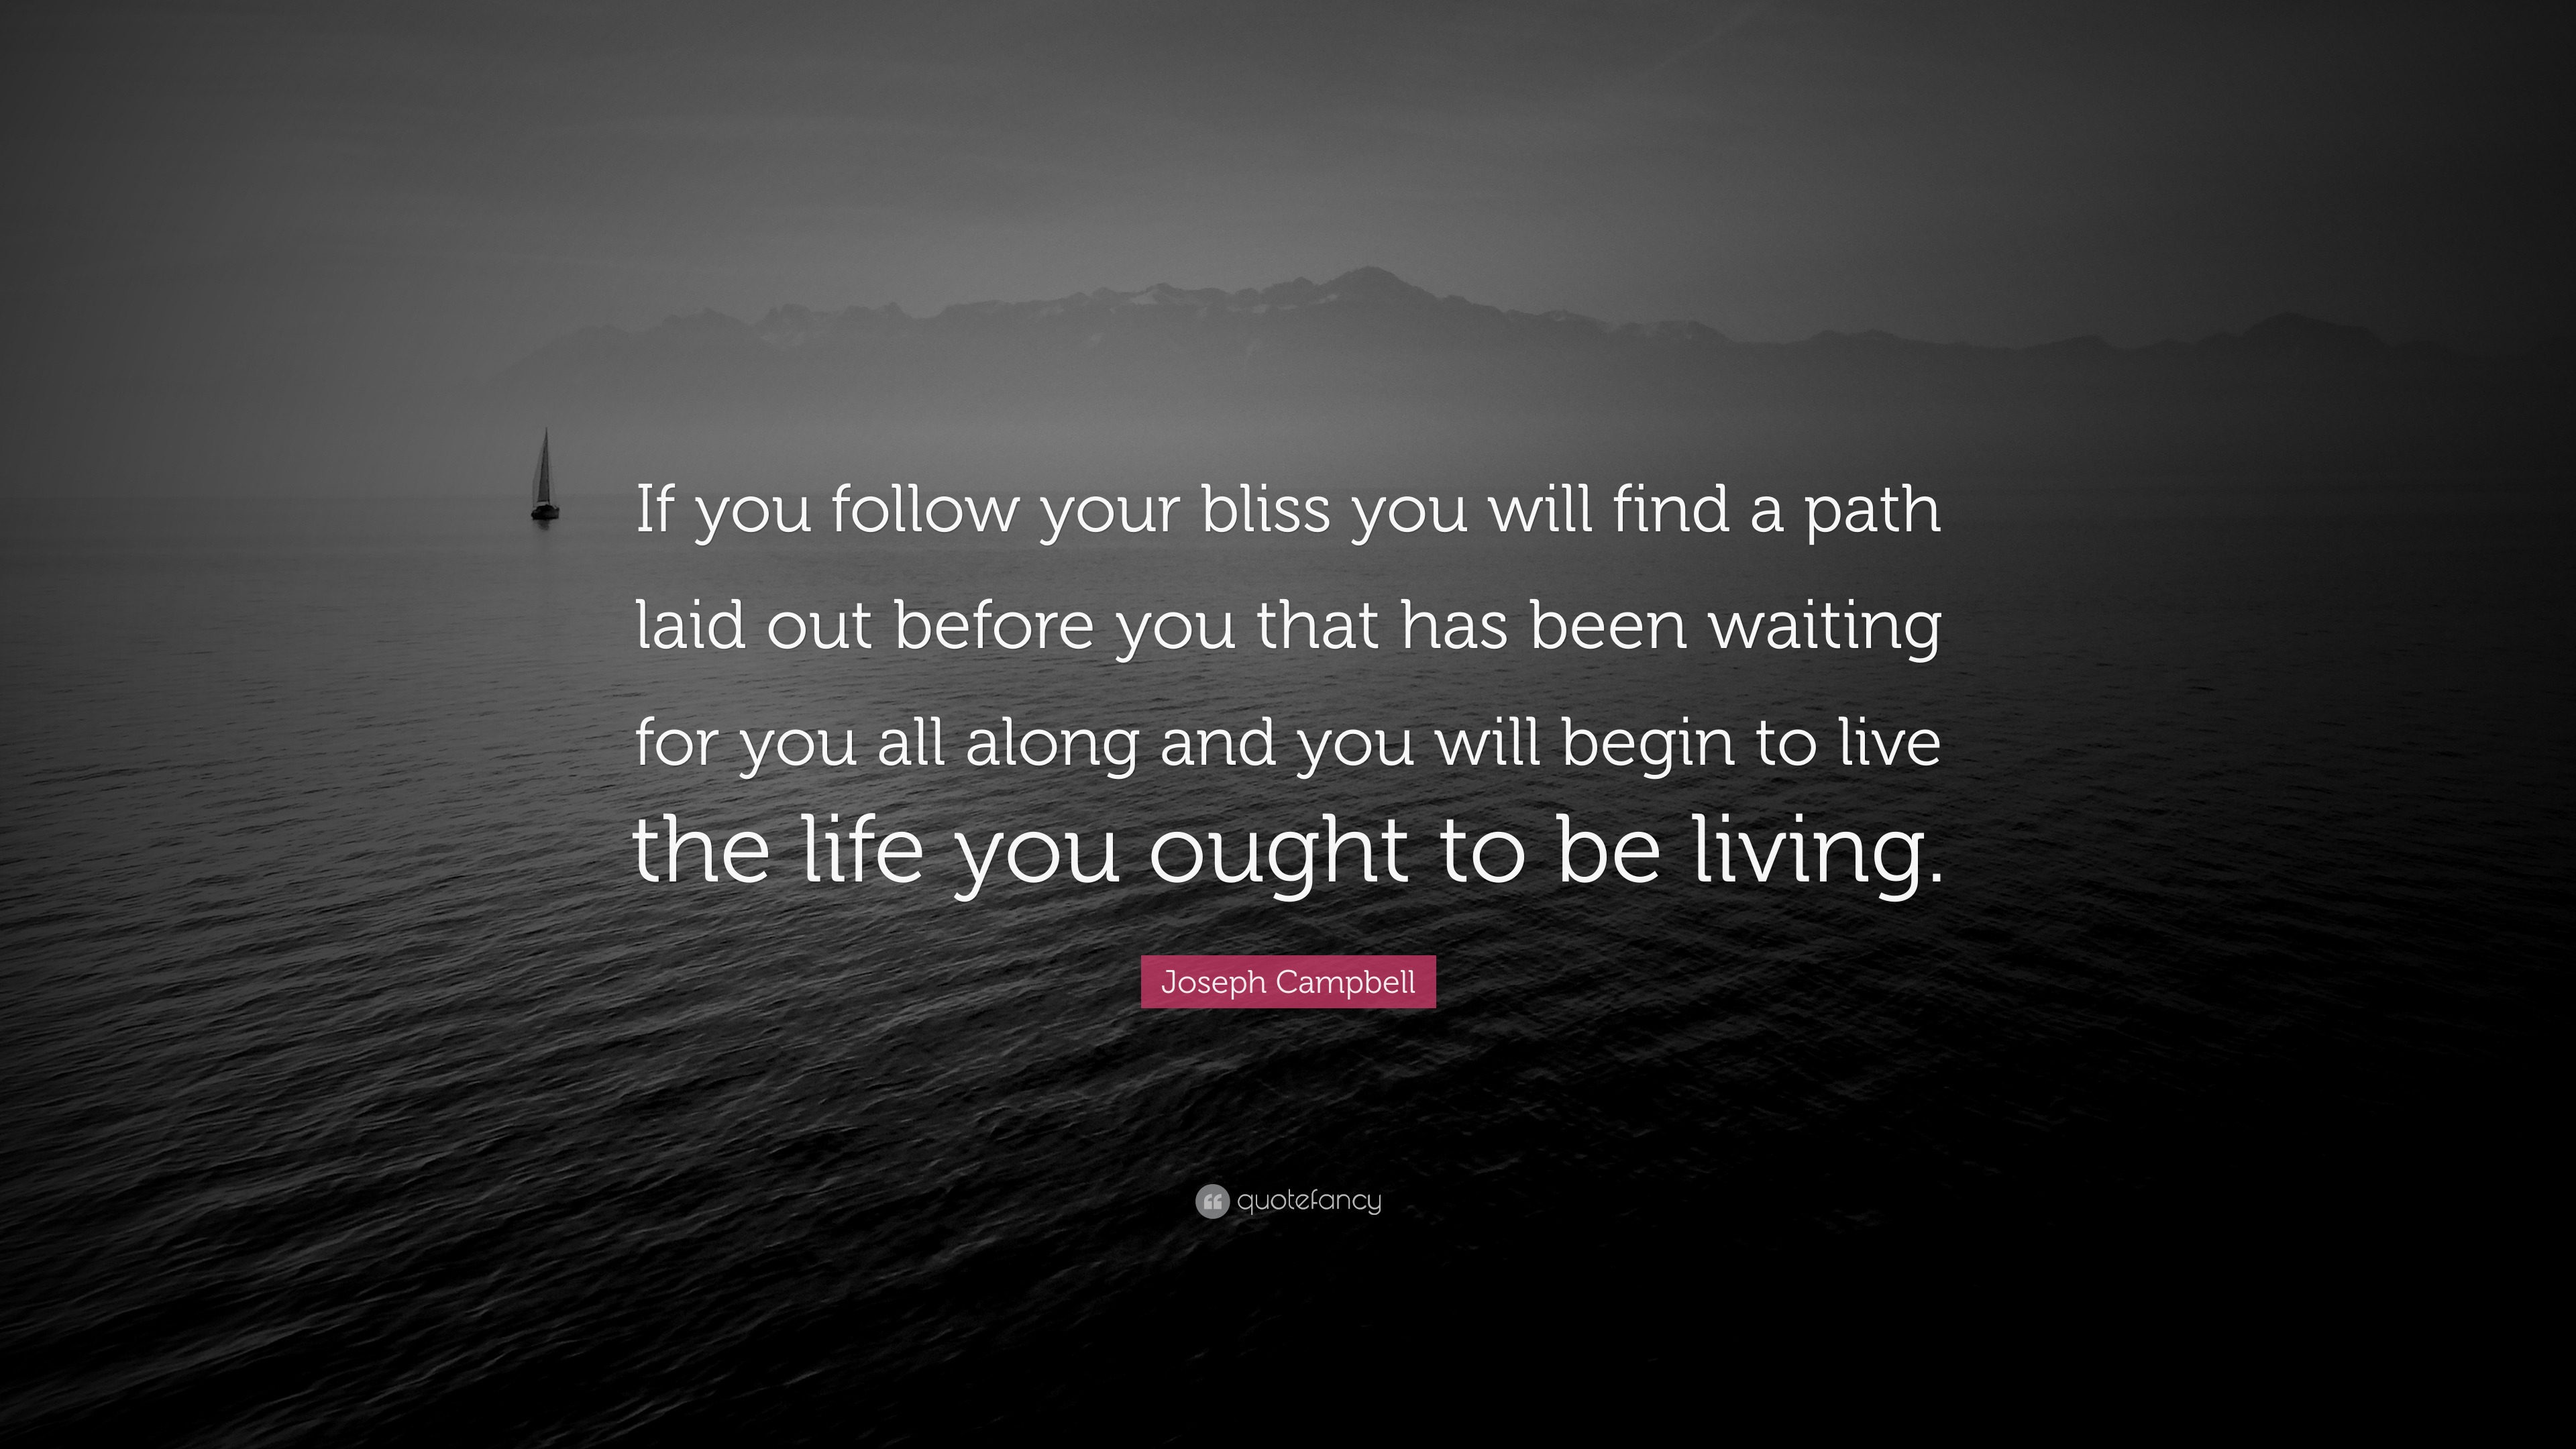 Joseph Campbell Quote: “If you follow your bliss you will find a path ...